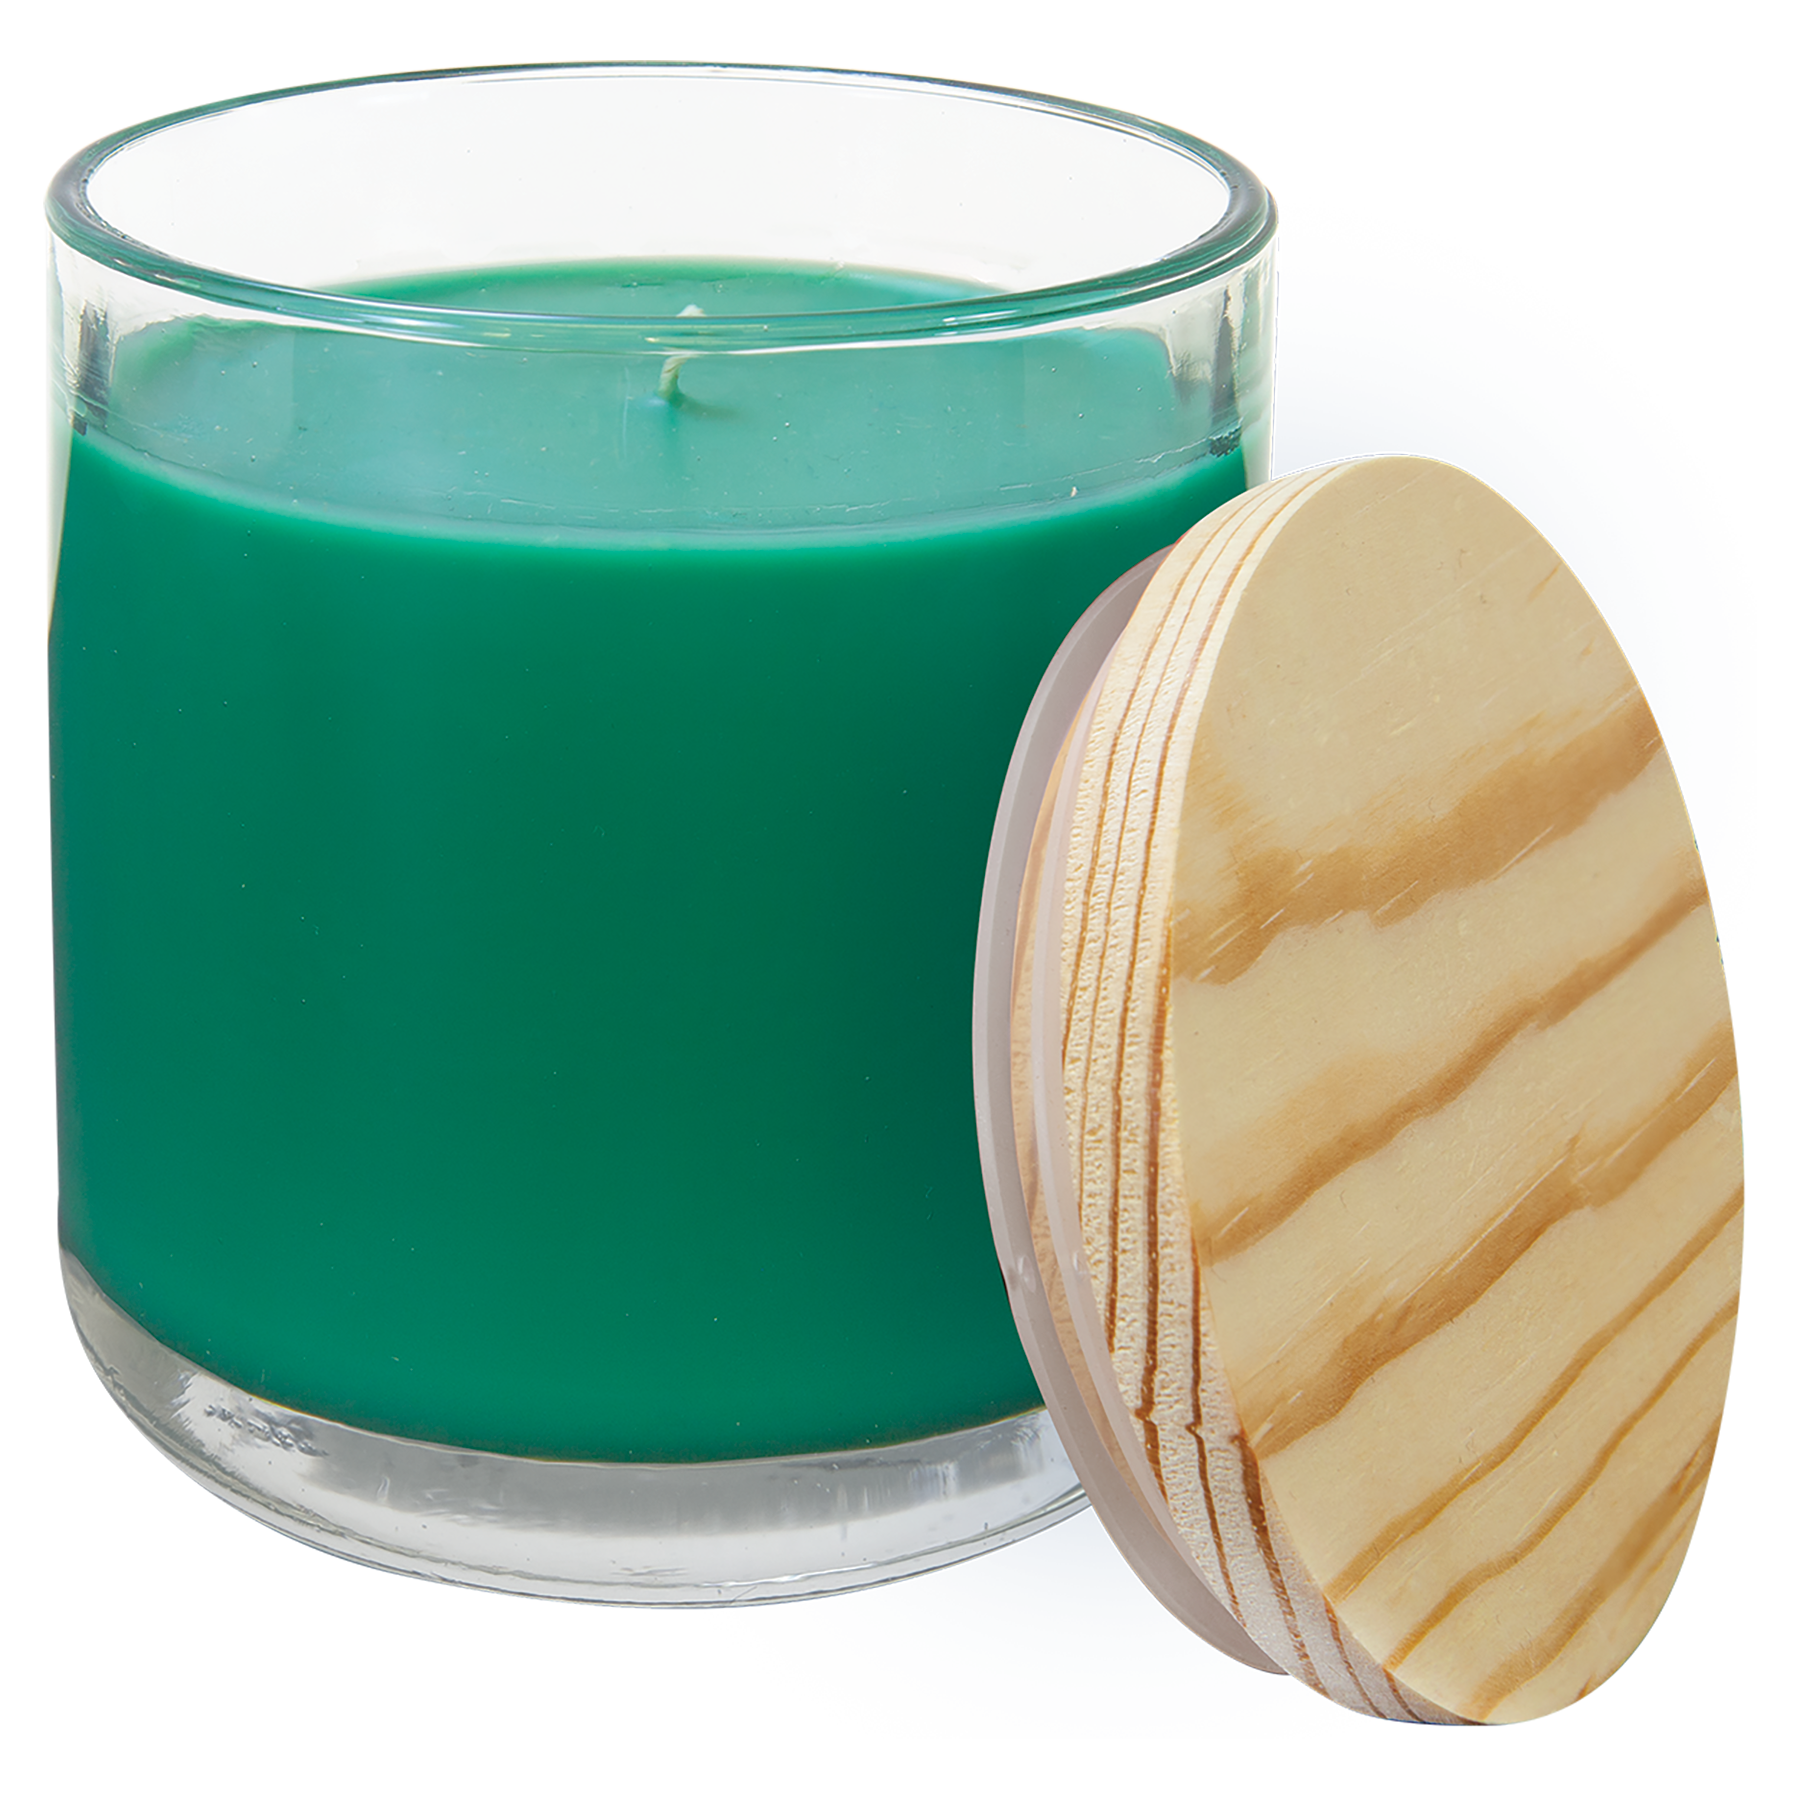 14 oz. Fresh Pine Candle in a Glass Holder with Wood Lid